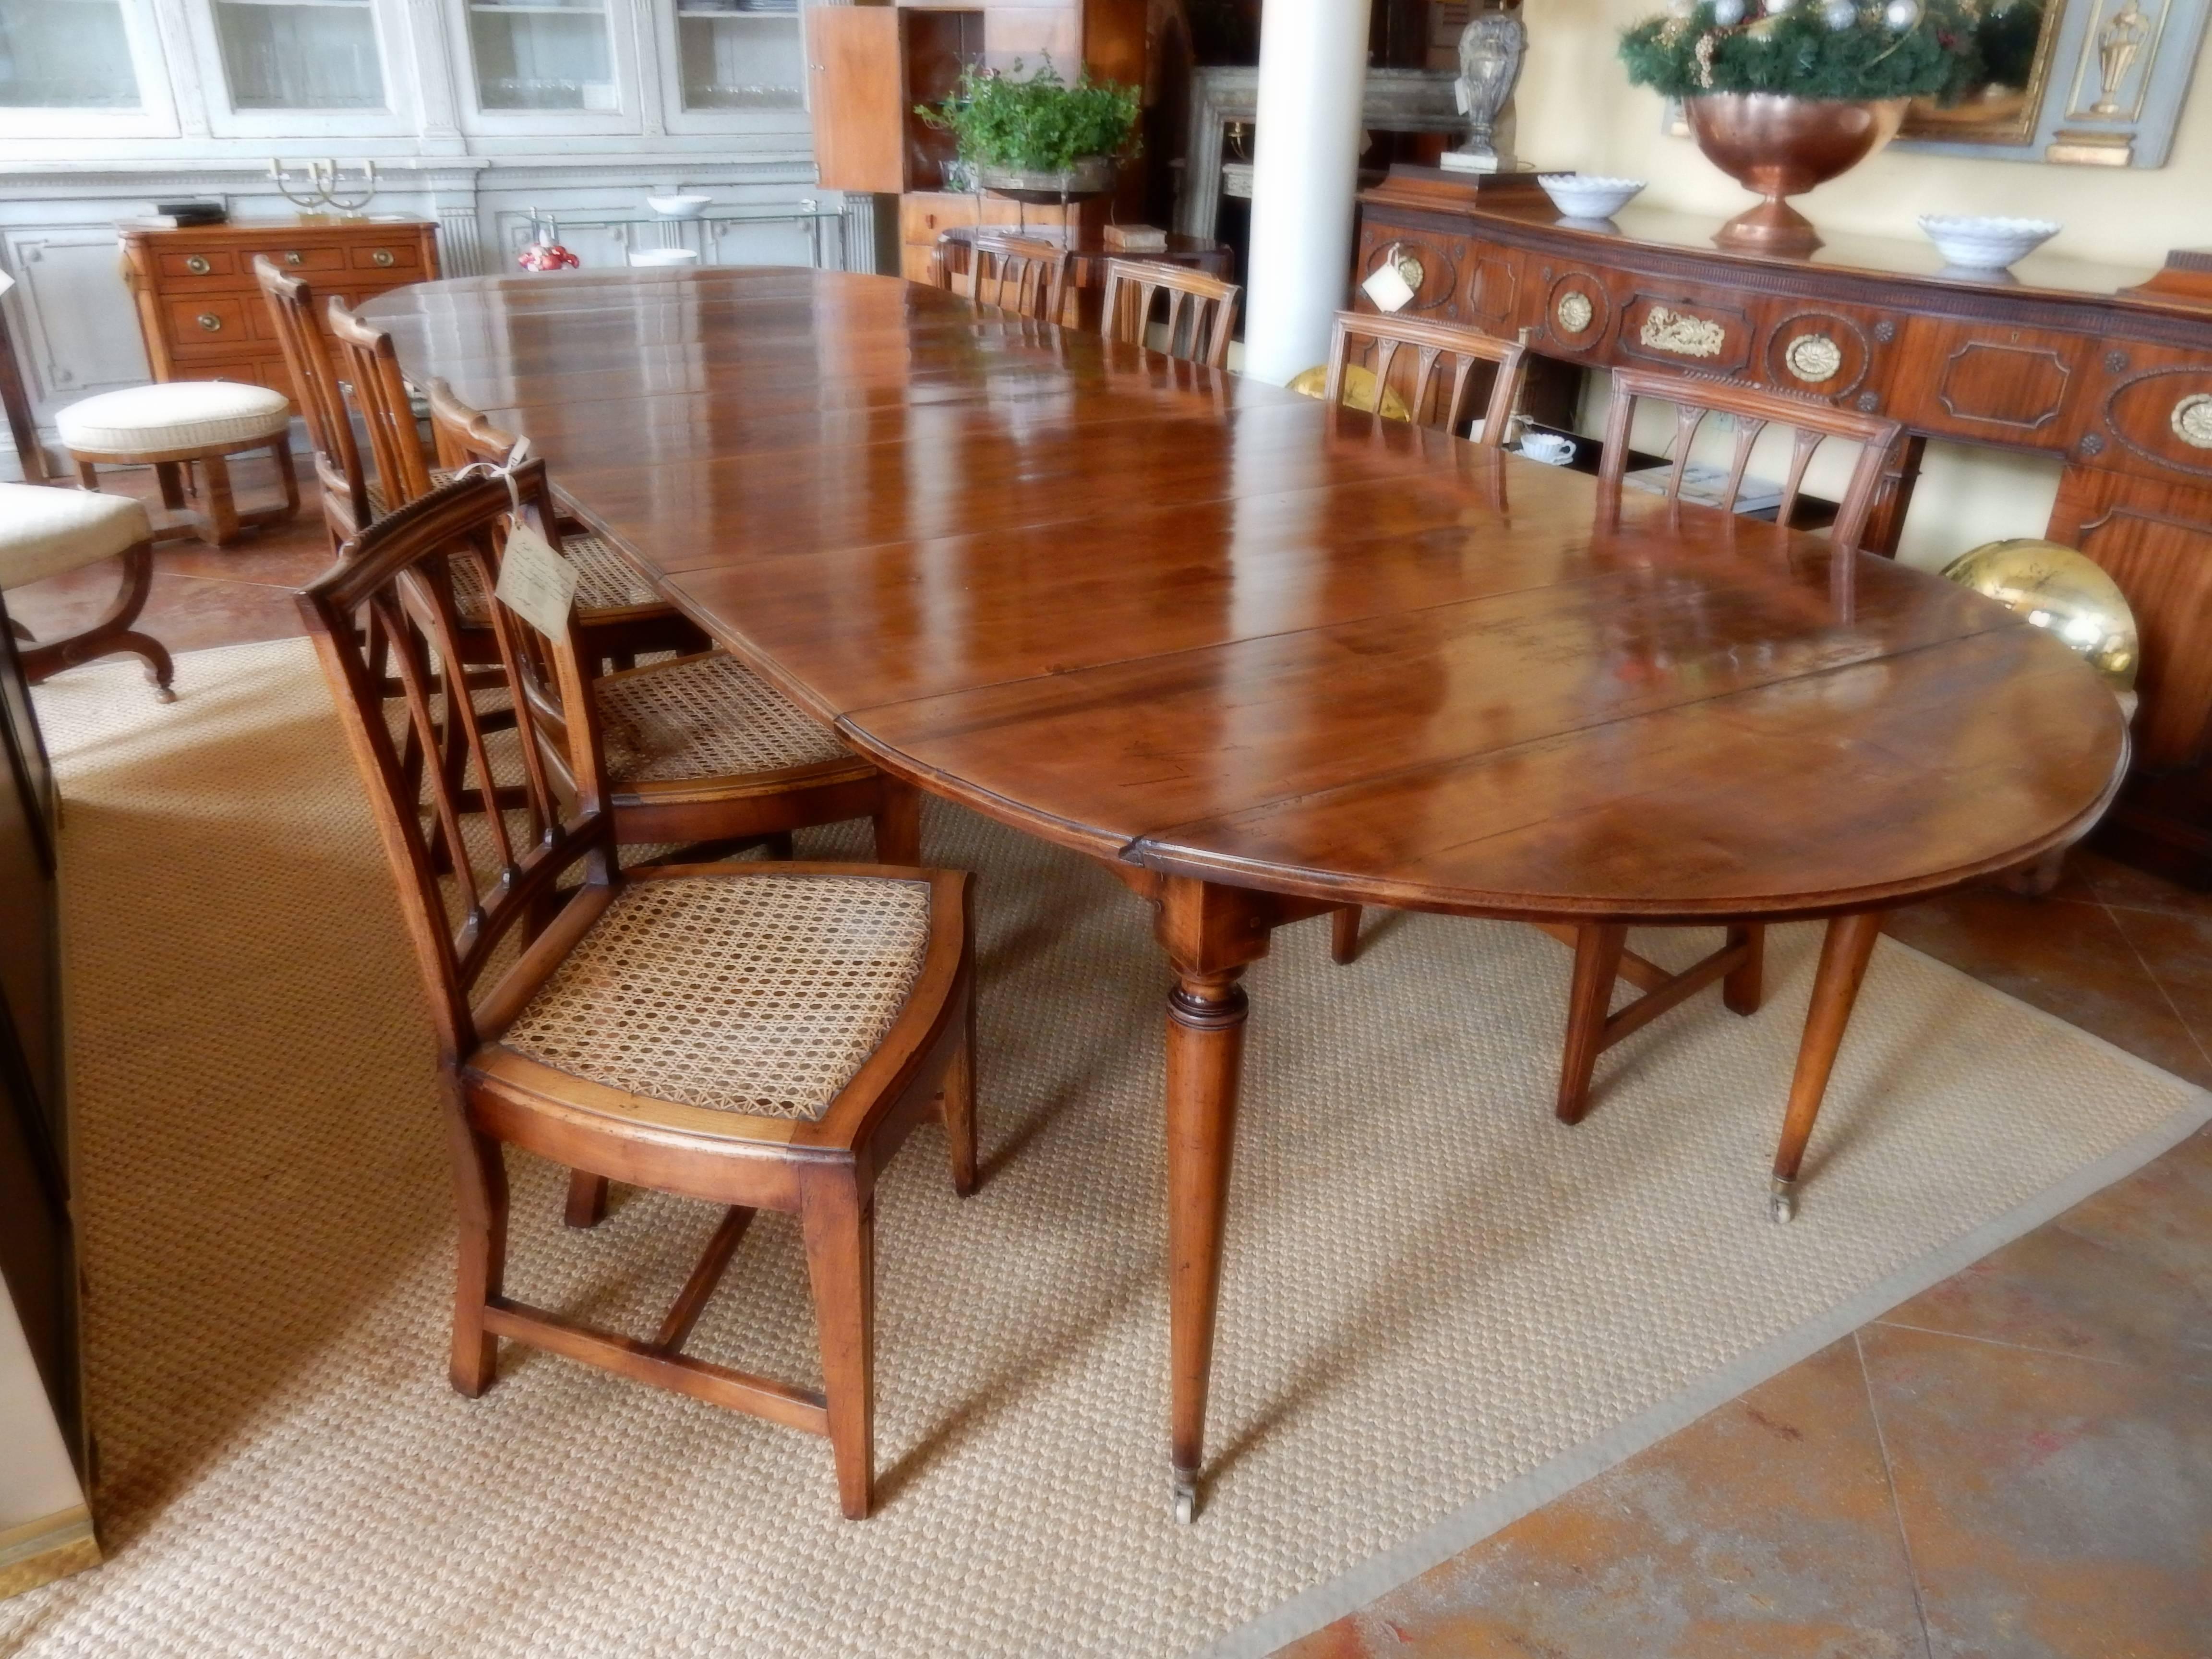 Beautiful 19th century walnut French Directoire style extension dining table.
Has five new custom-made and matched leaves around 19